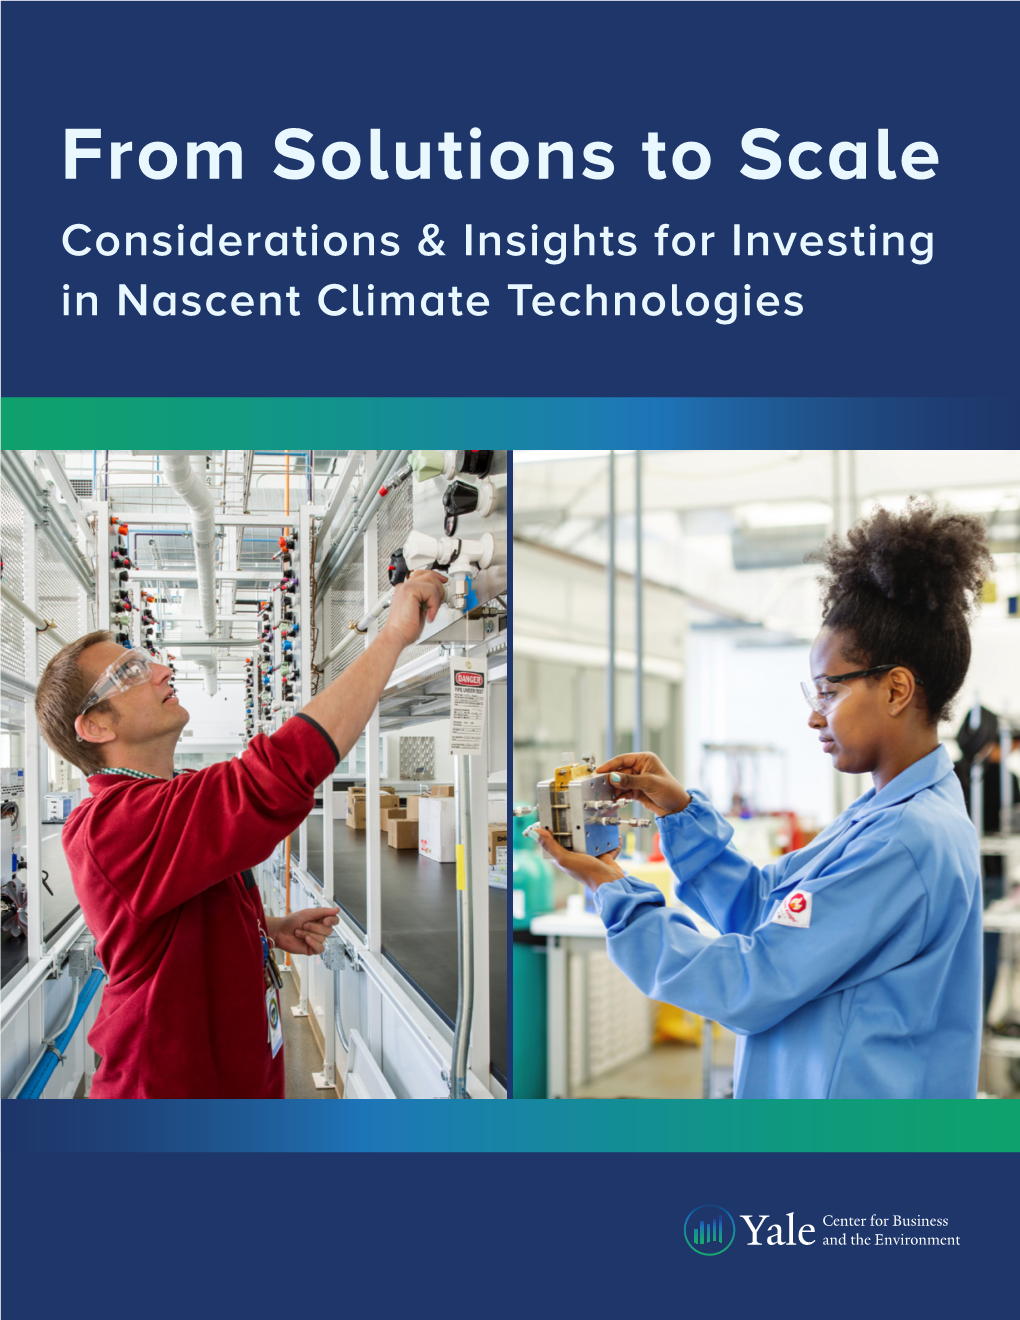 From Solutions to Scale Considerations & Insights for Investing in Nascent Climate Technologies